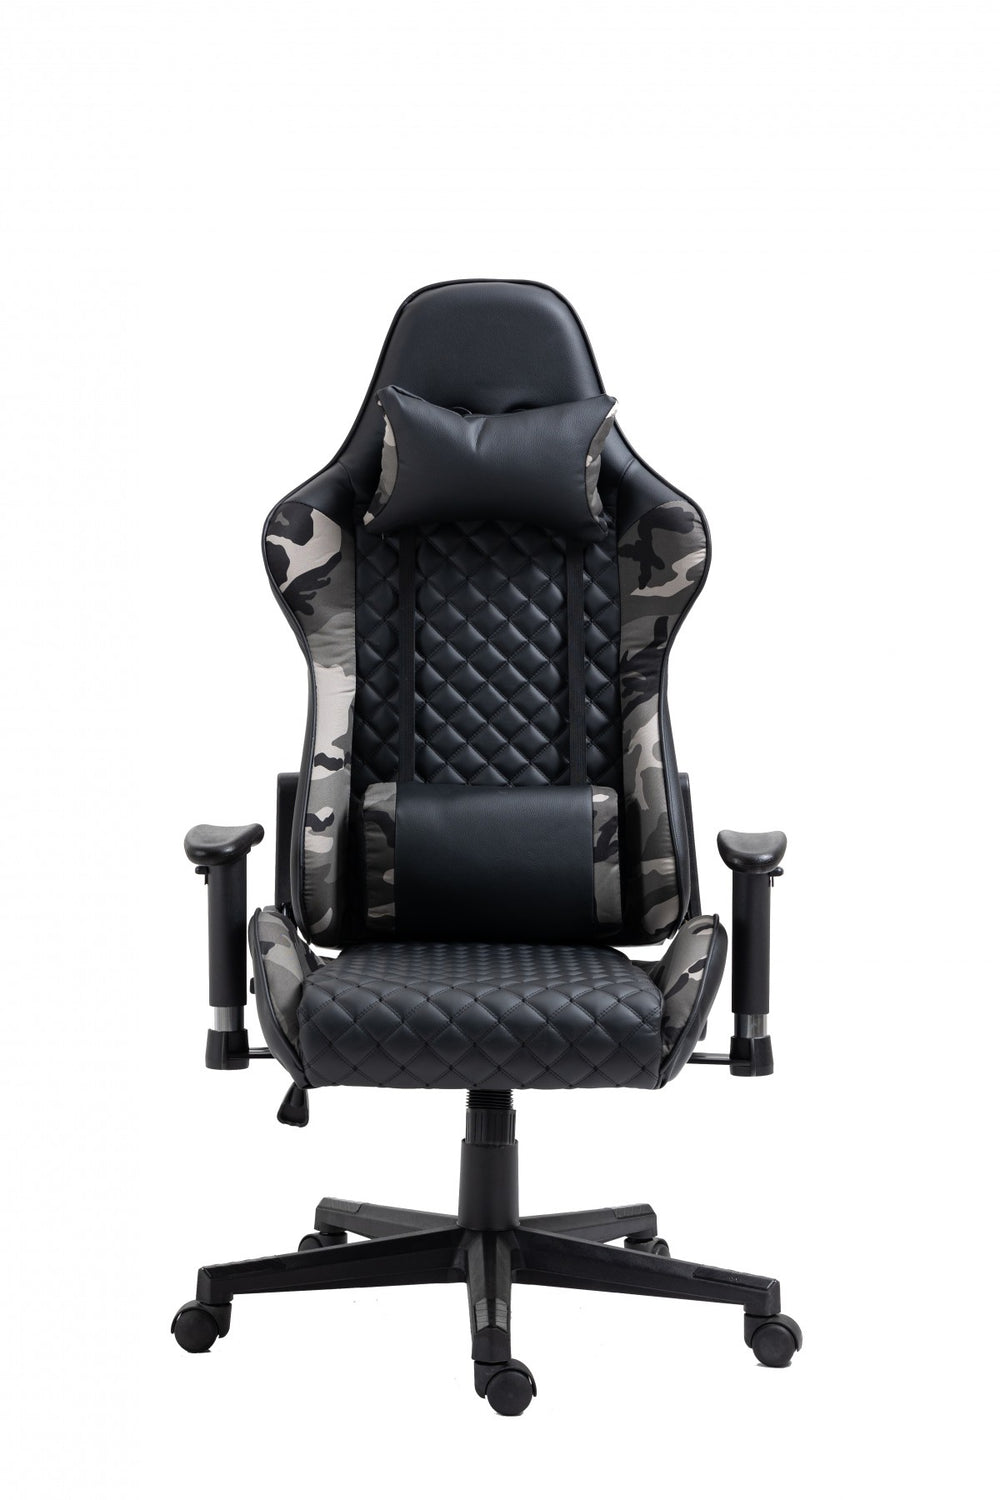 Enhance Your Gaming Experience with our Black/Camo Gaming Chair – Ultimate Comfort and Style